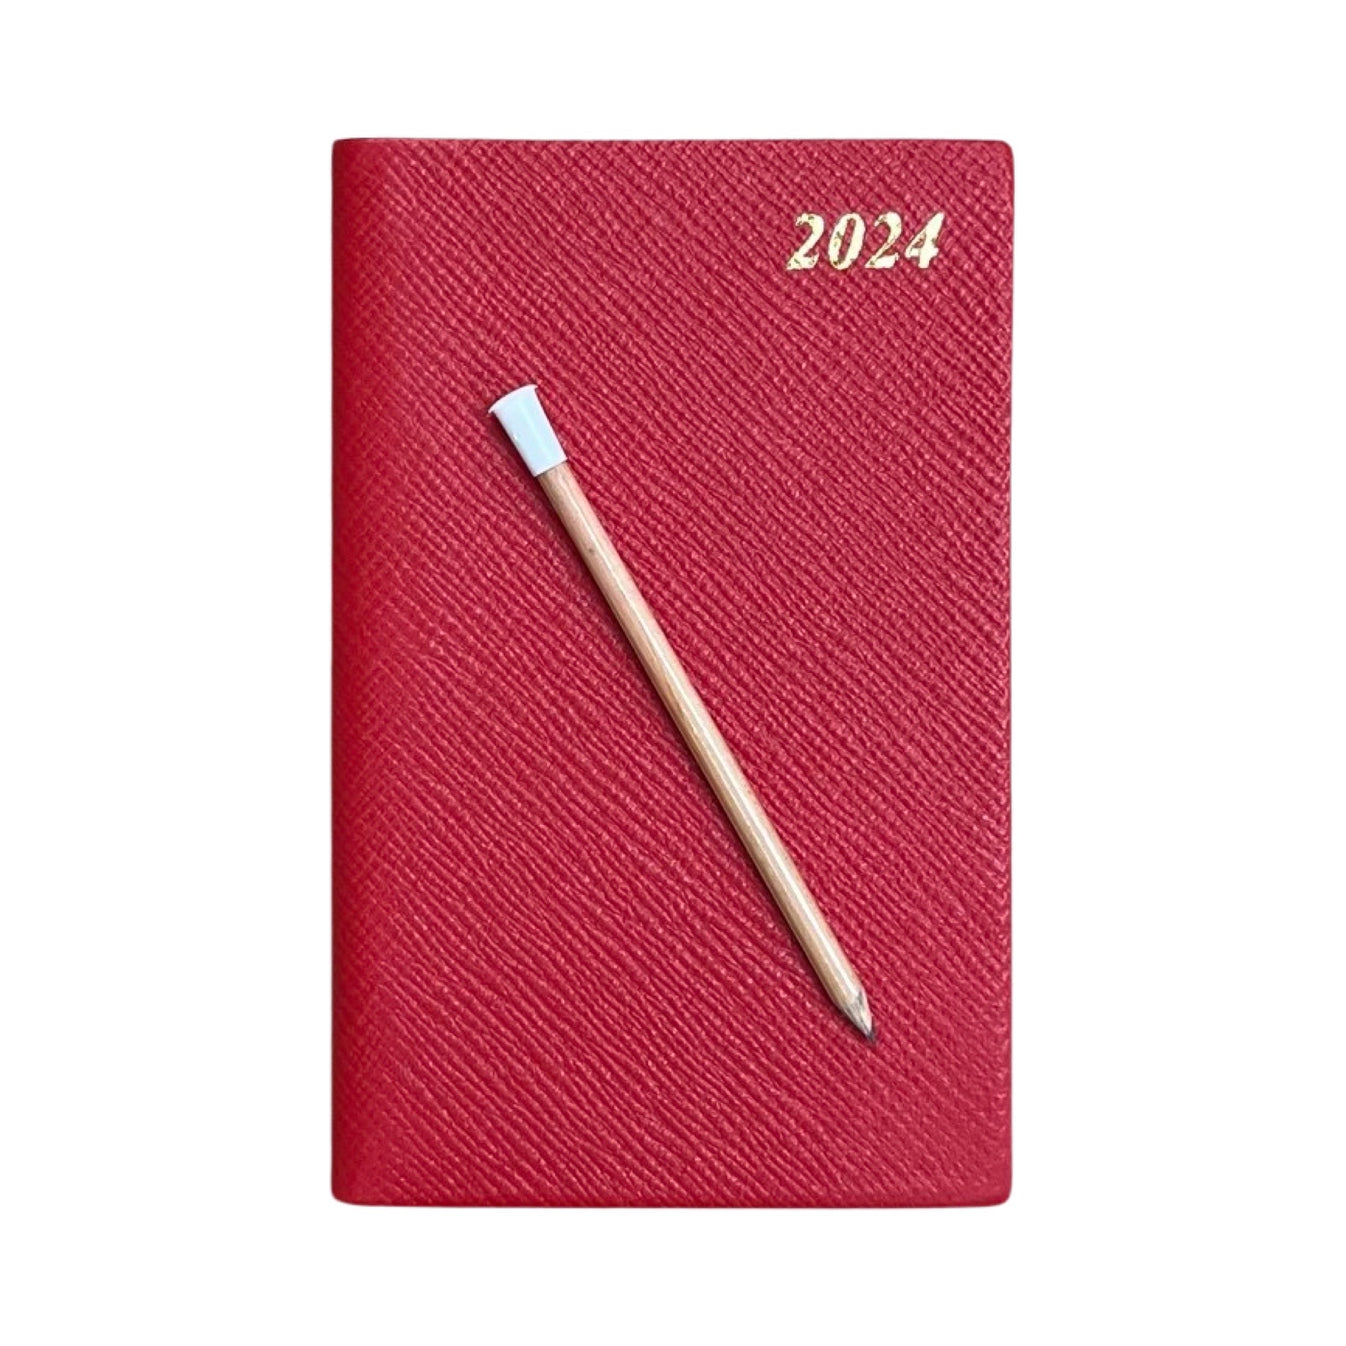 2023 5x3 Leather Pocket Calendar with Pencil Charing Cross D753LJ